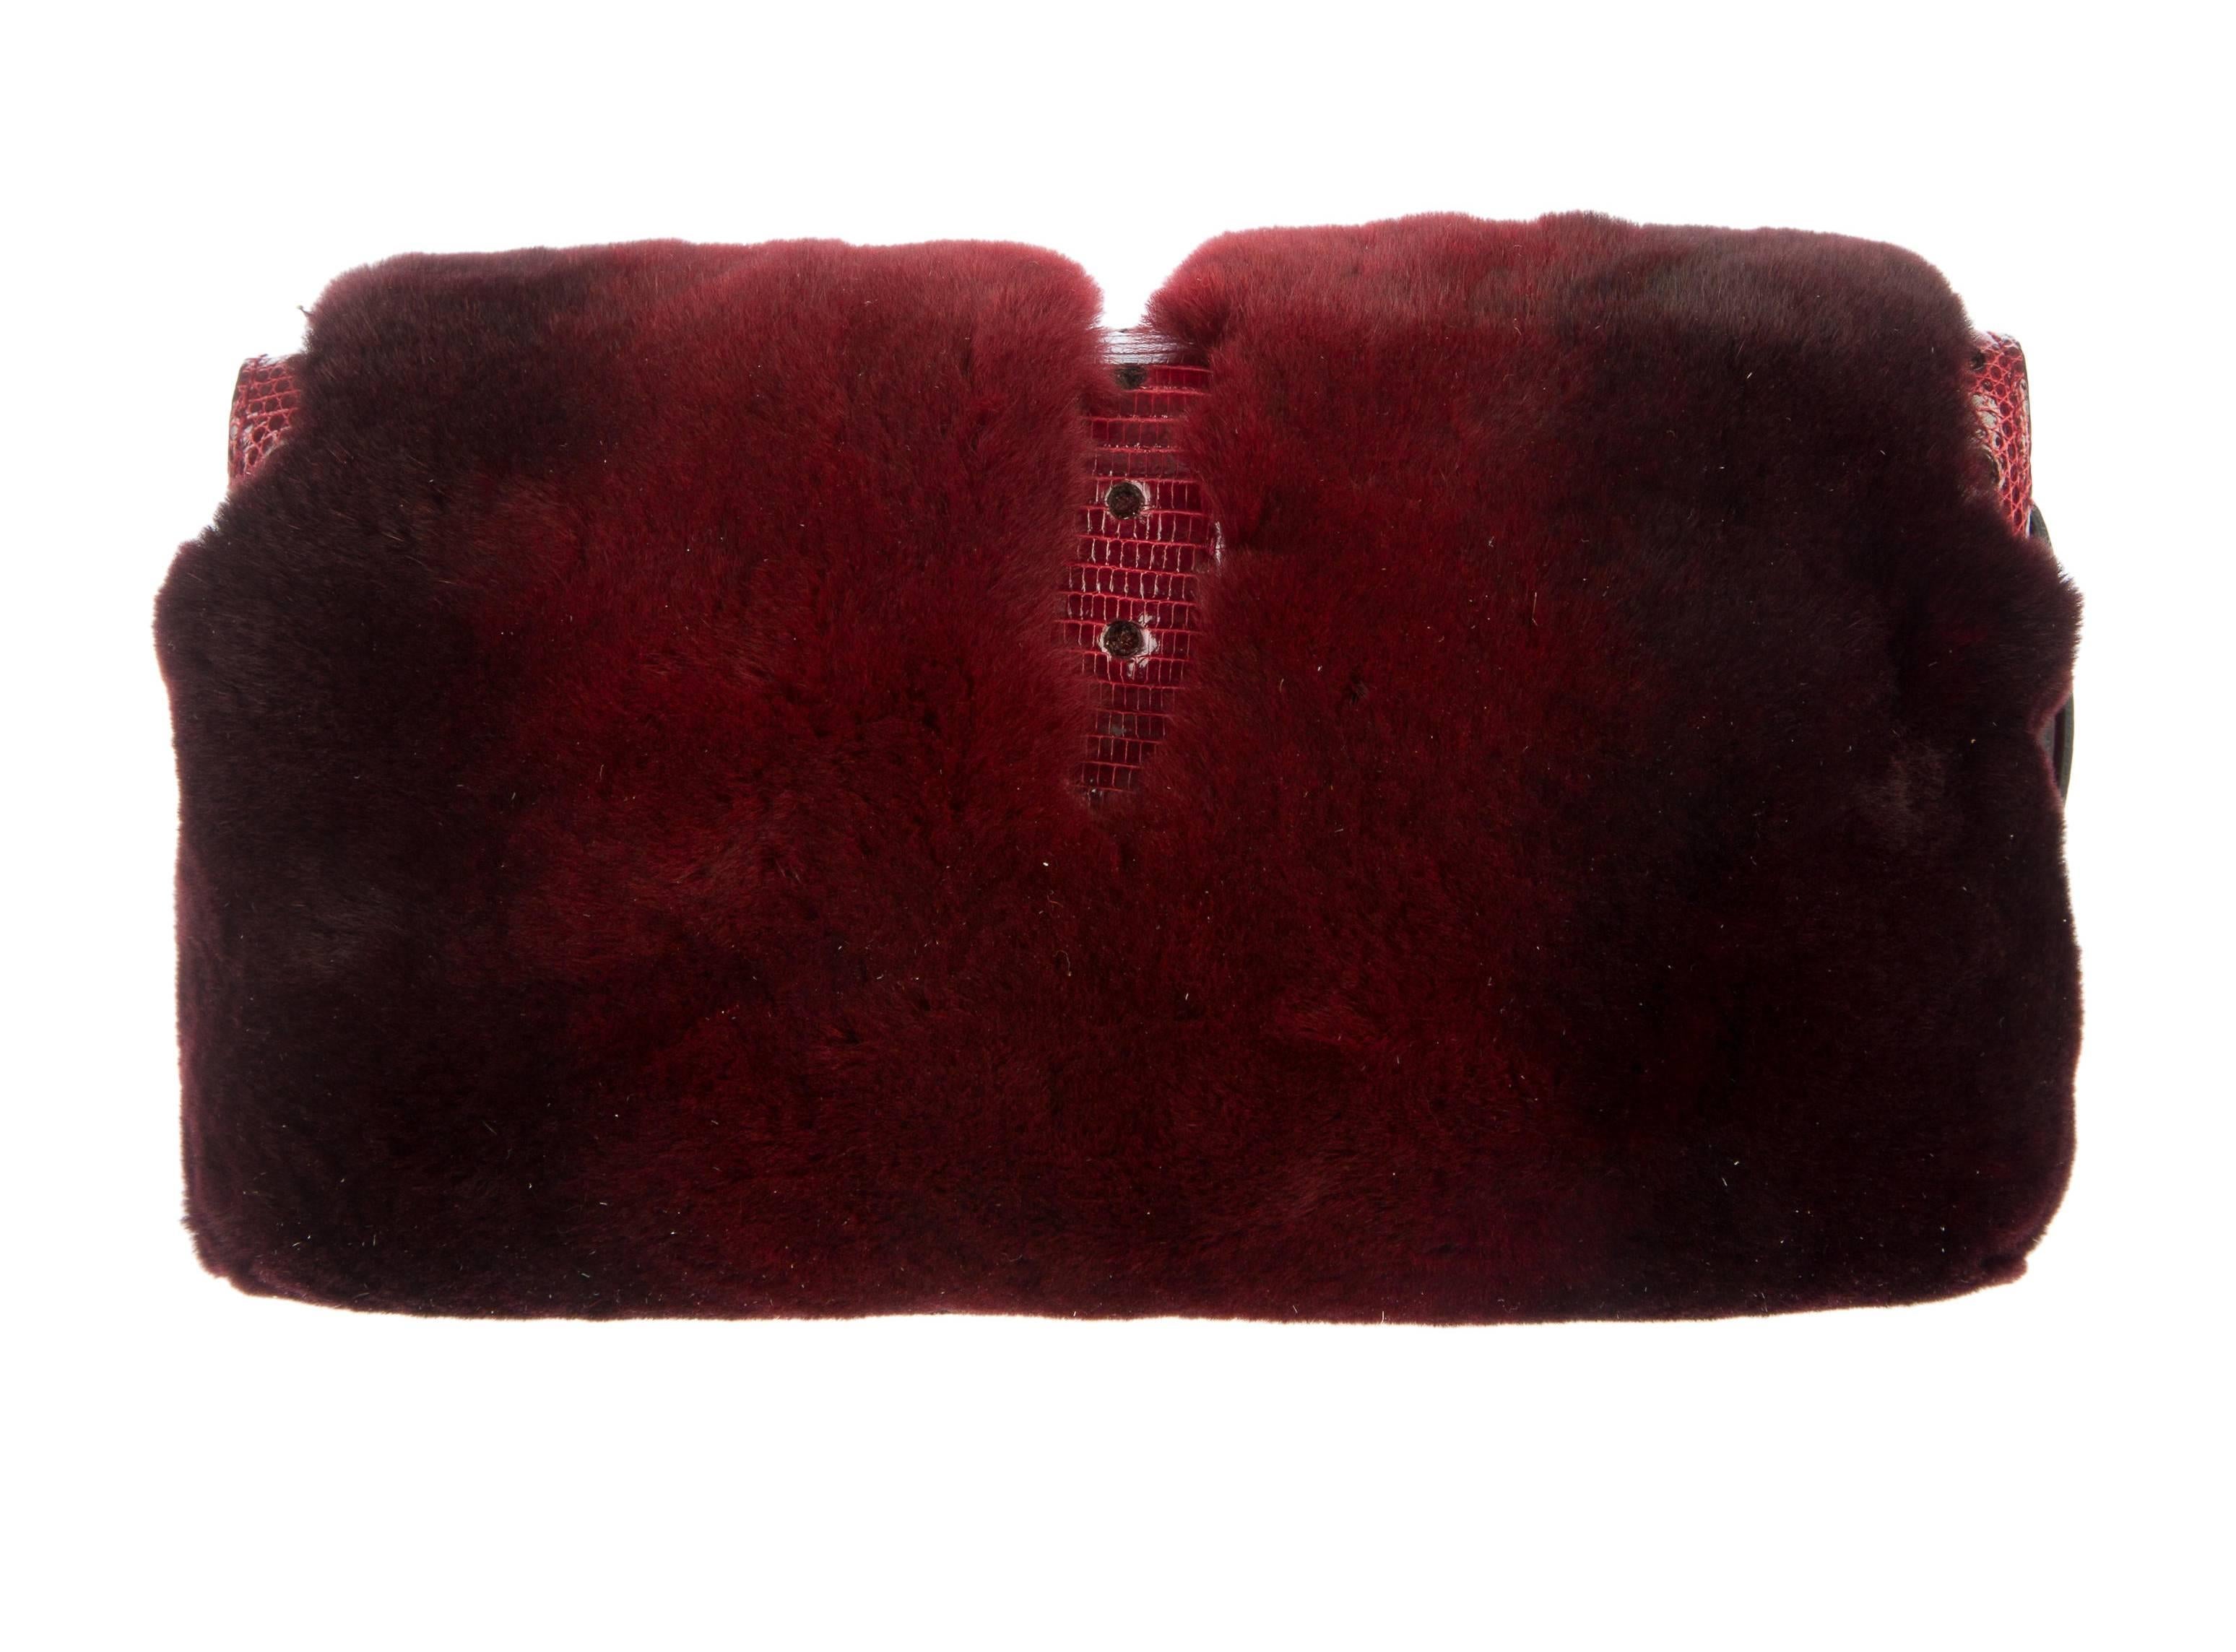 
A GUCCI signature piece that will last you for many years
Very rare Collector's item
Only very few pieces were made and sold in selected boutiques
Made of beautiful burgundy fur (probably shorn mink?)
Huge handcrafted jeweled clasp discreetly